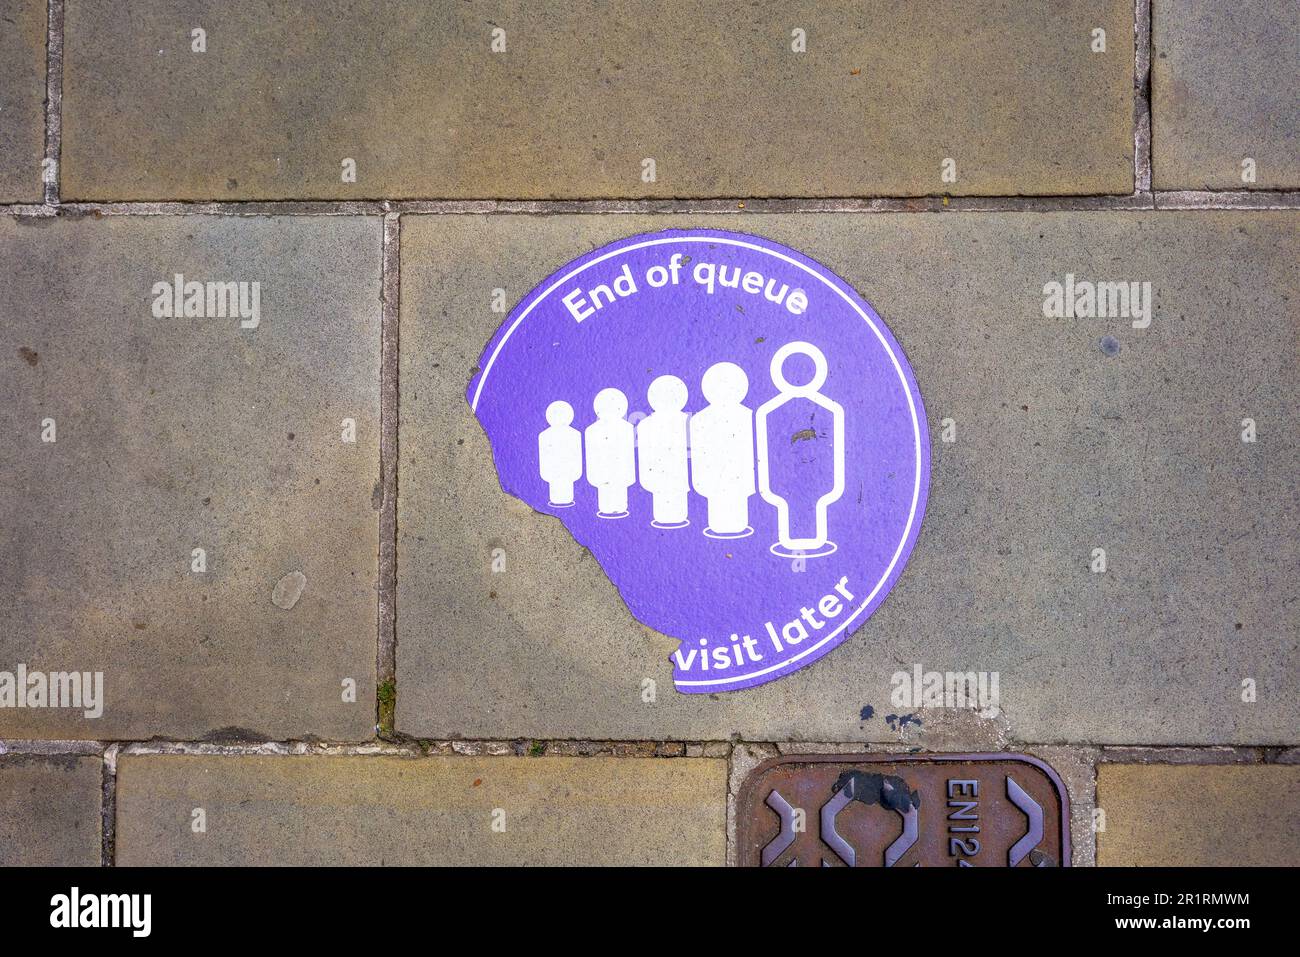 A torn pavement sticker depicting a line of people marking the end of a queue Stock Photo